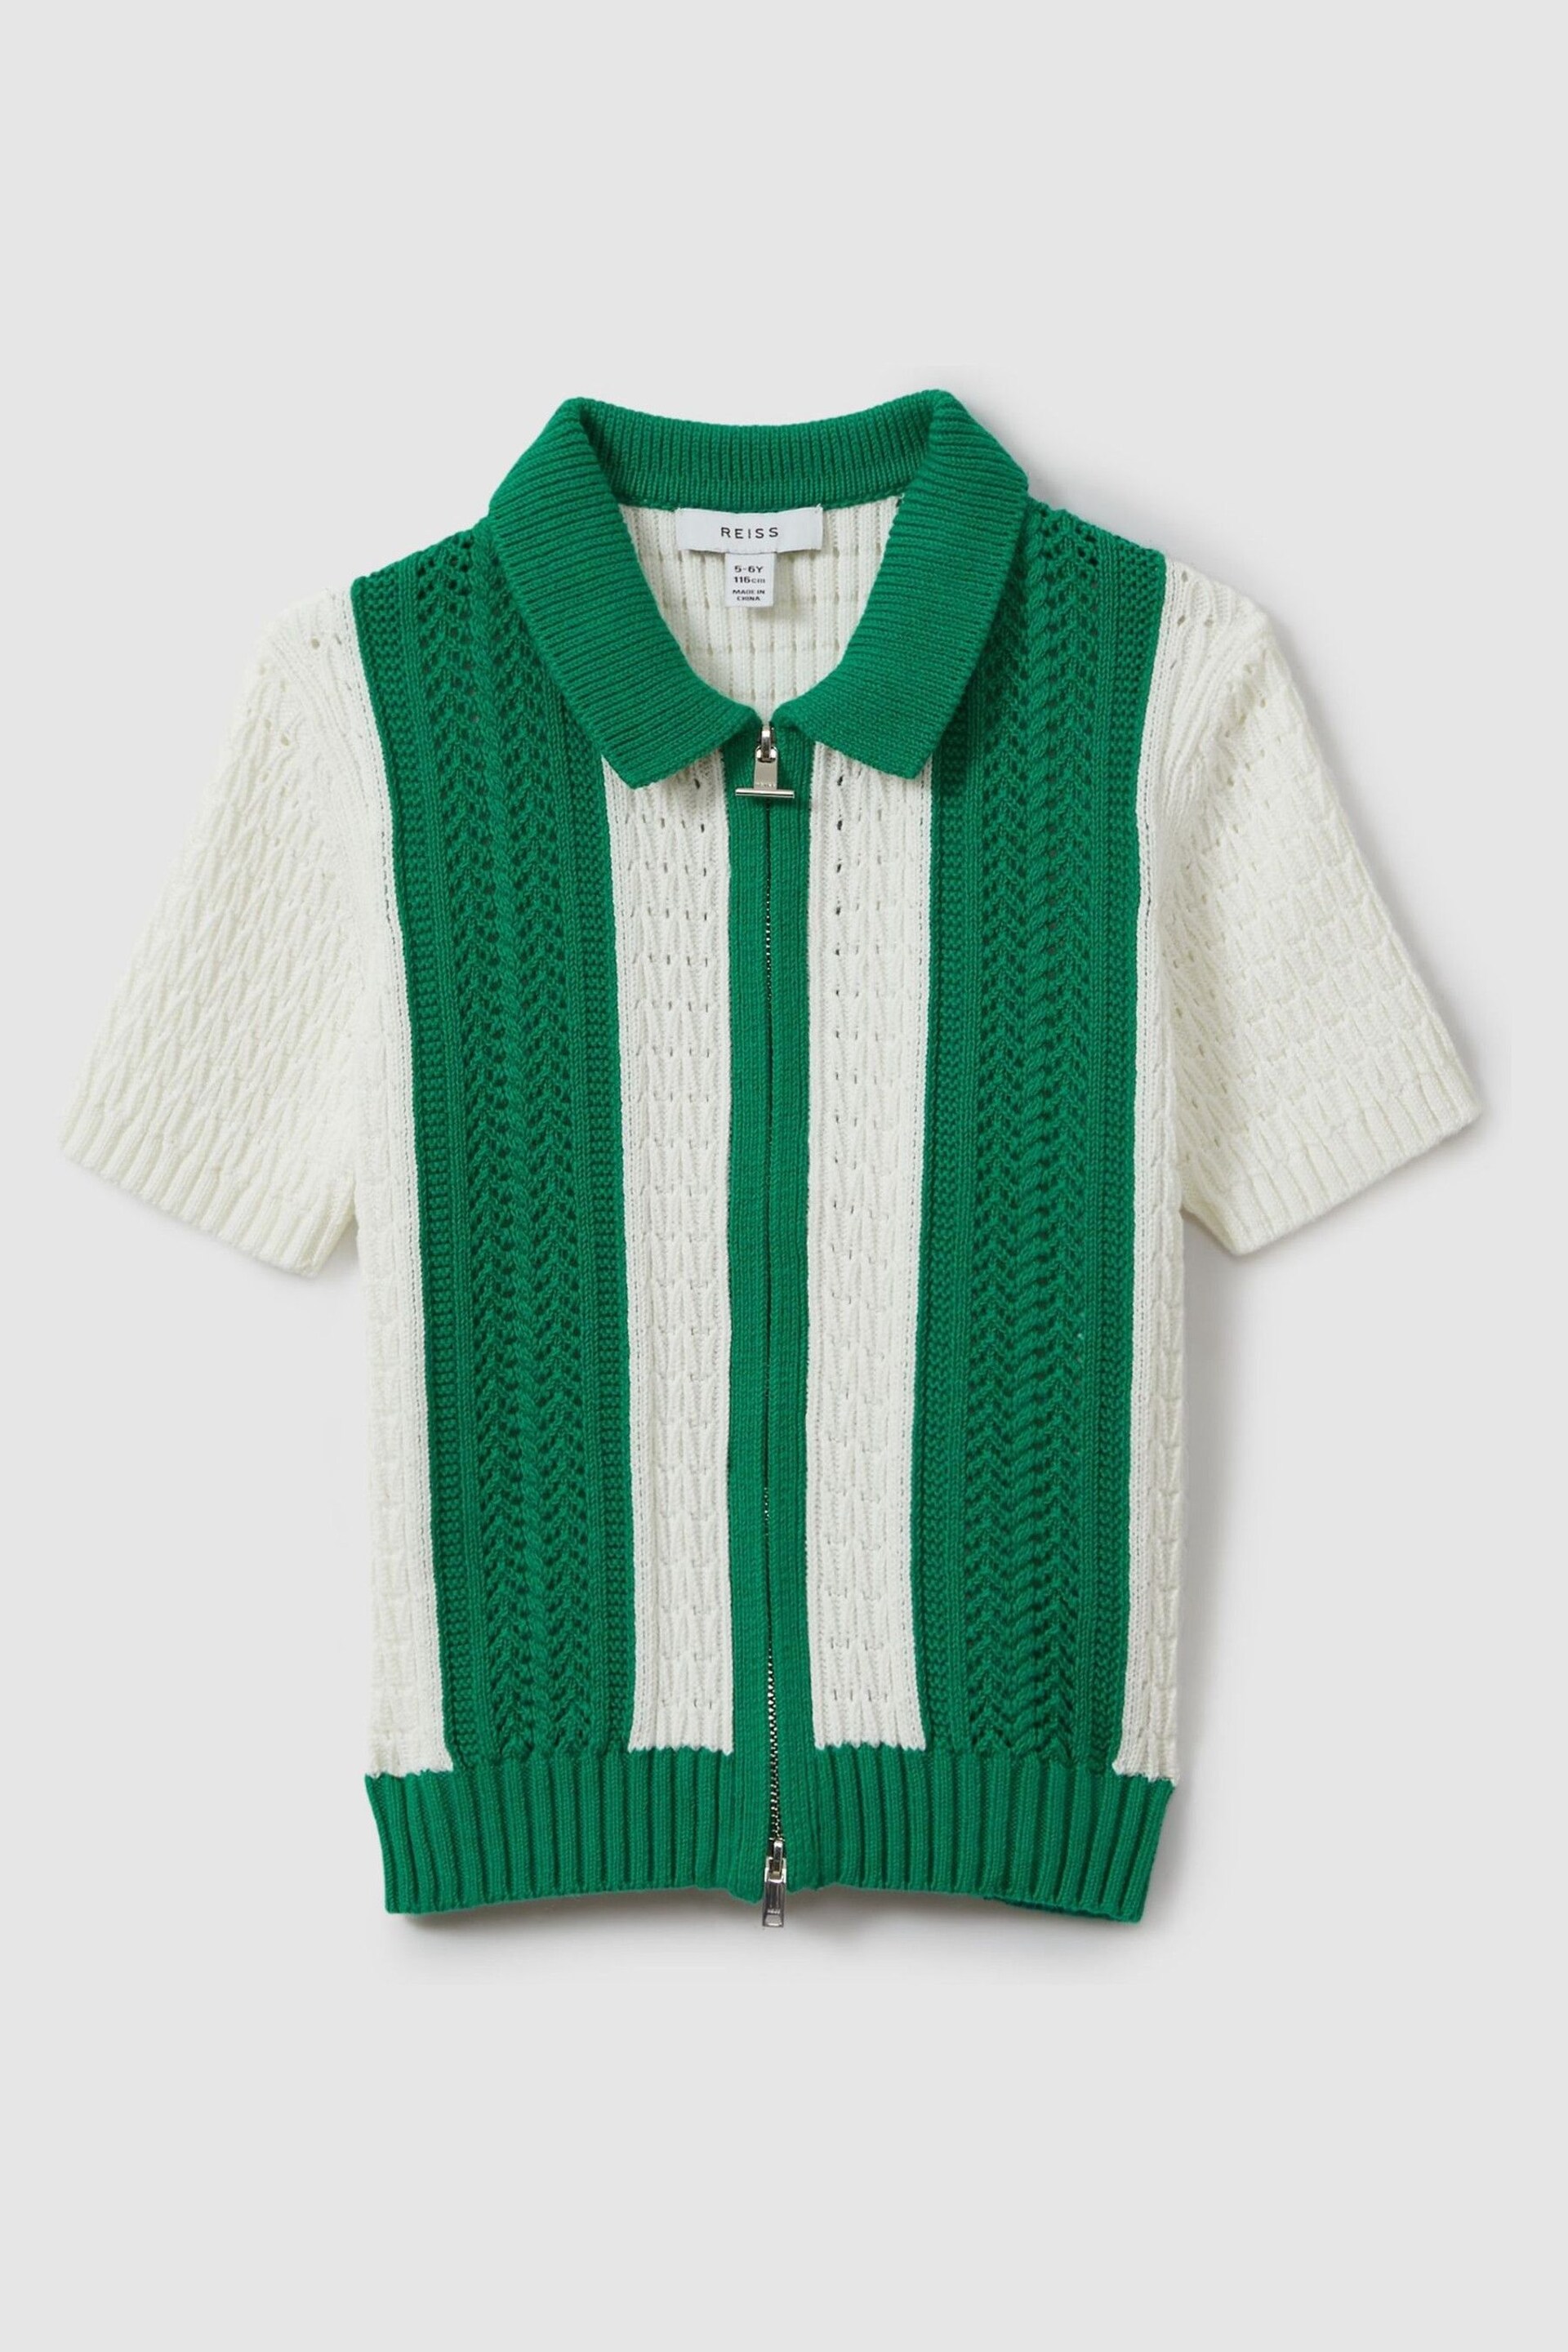 Reiss White/Bright Green Painter Junior Knitted Cotton Zip Front Shirt - Image 2 of 4